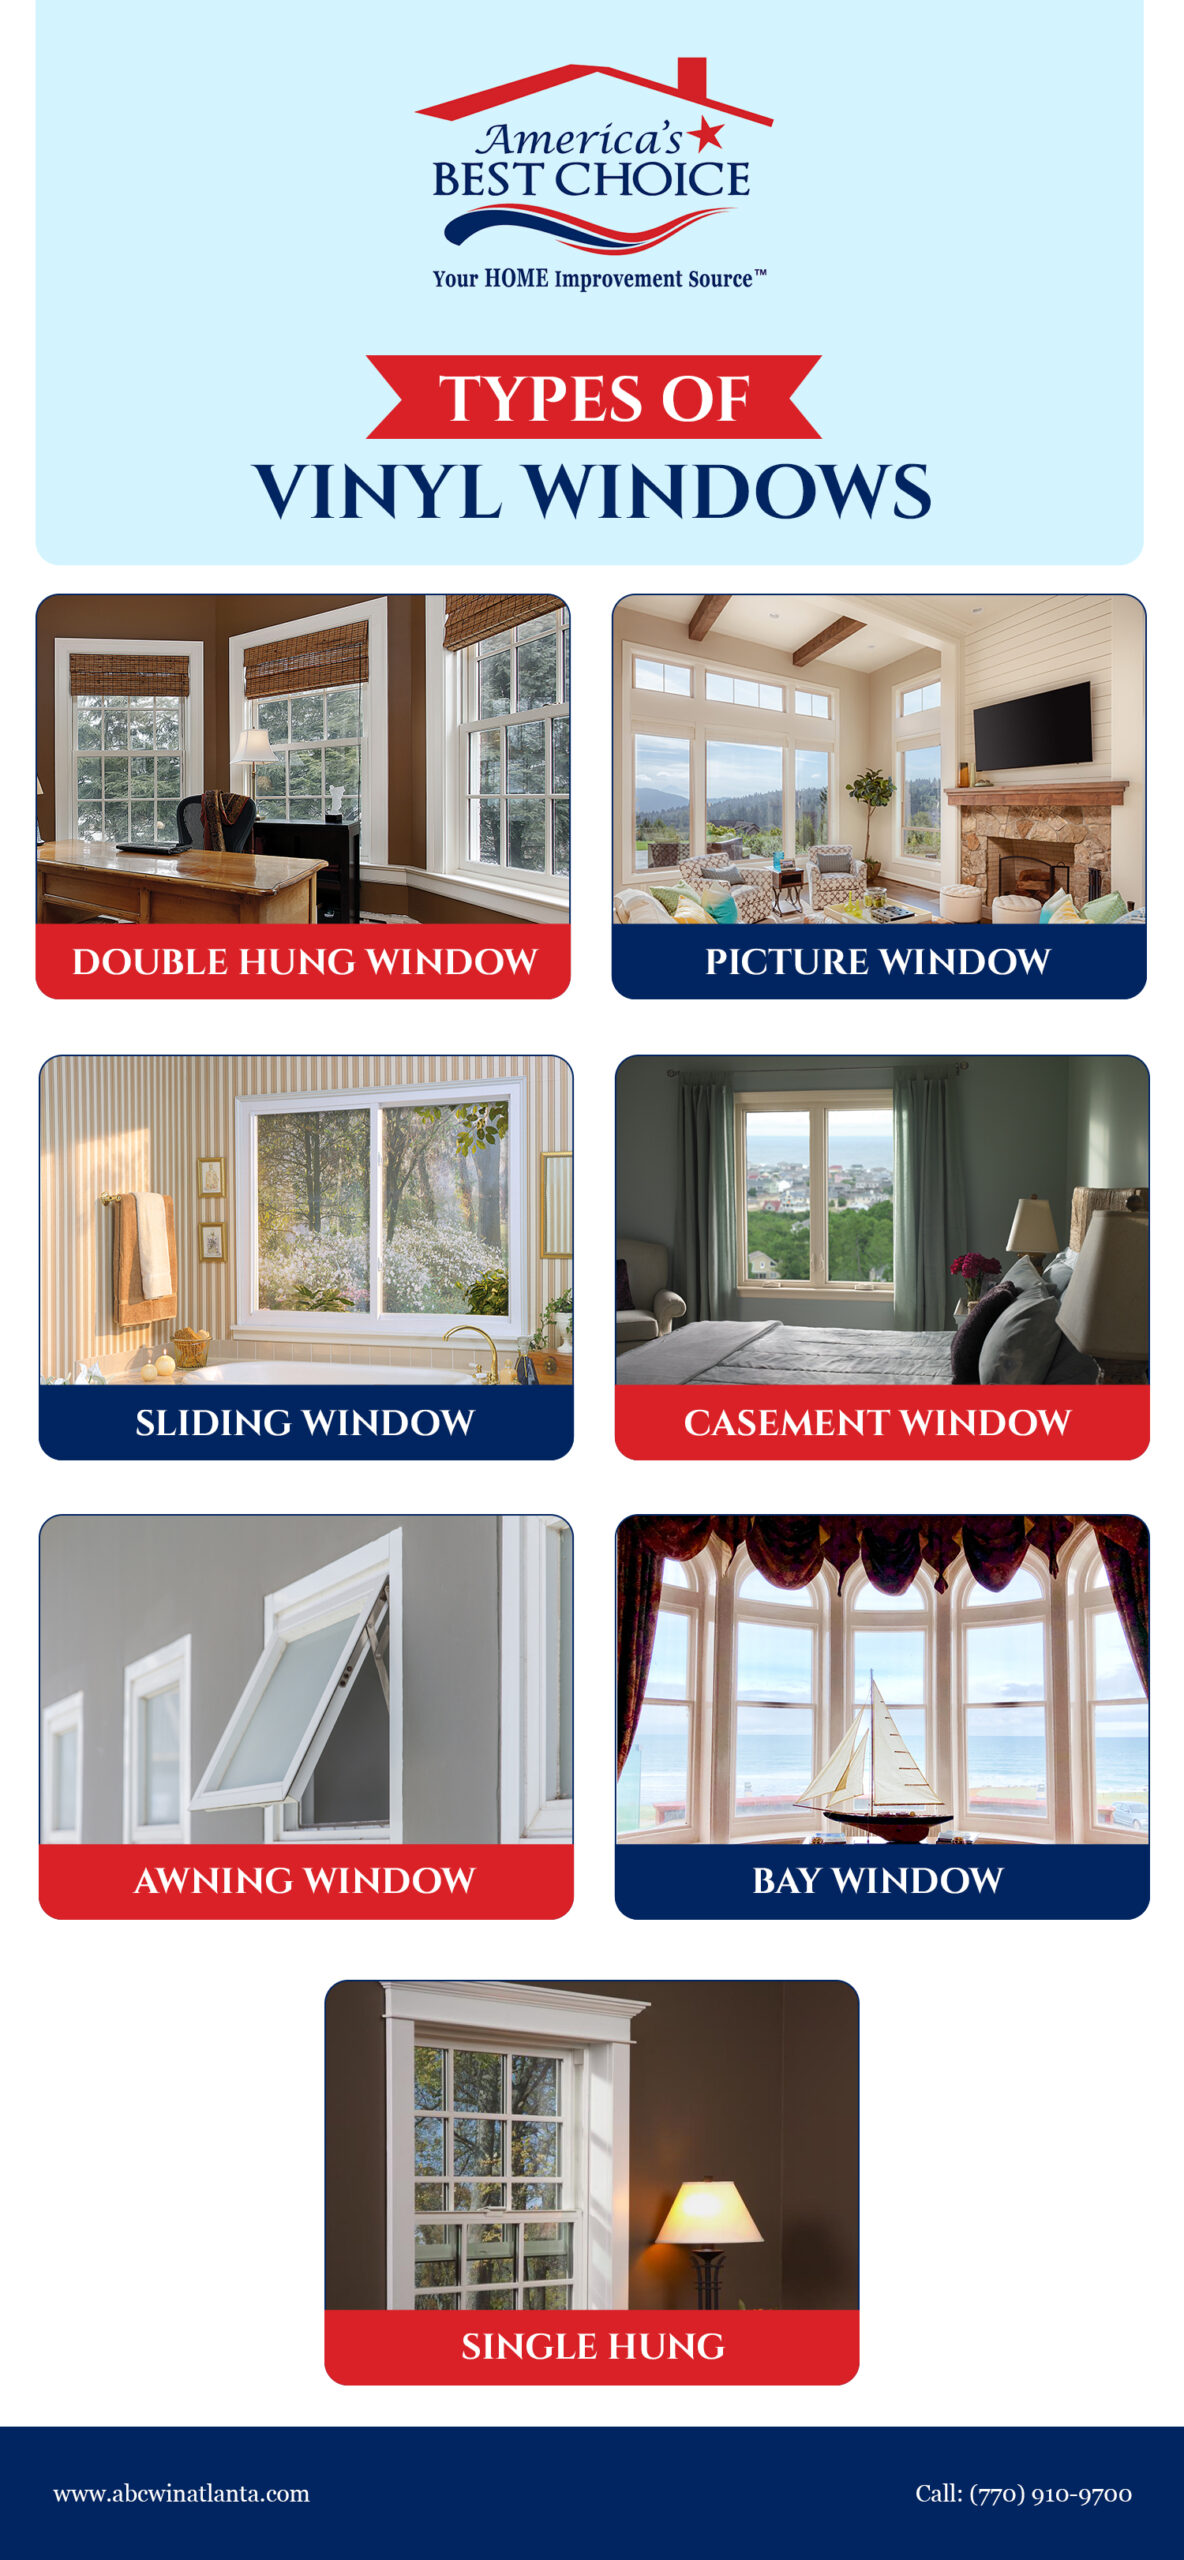 This infographic displays the type of windows that are offered.